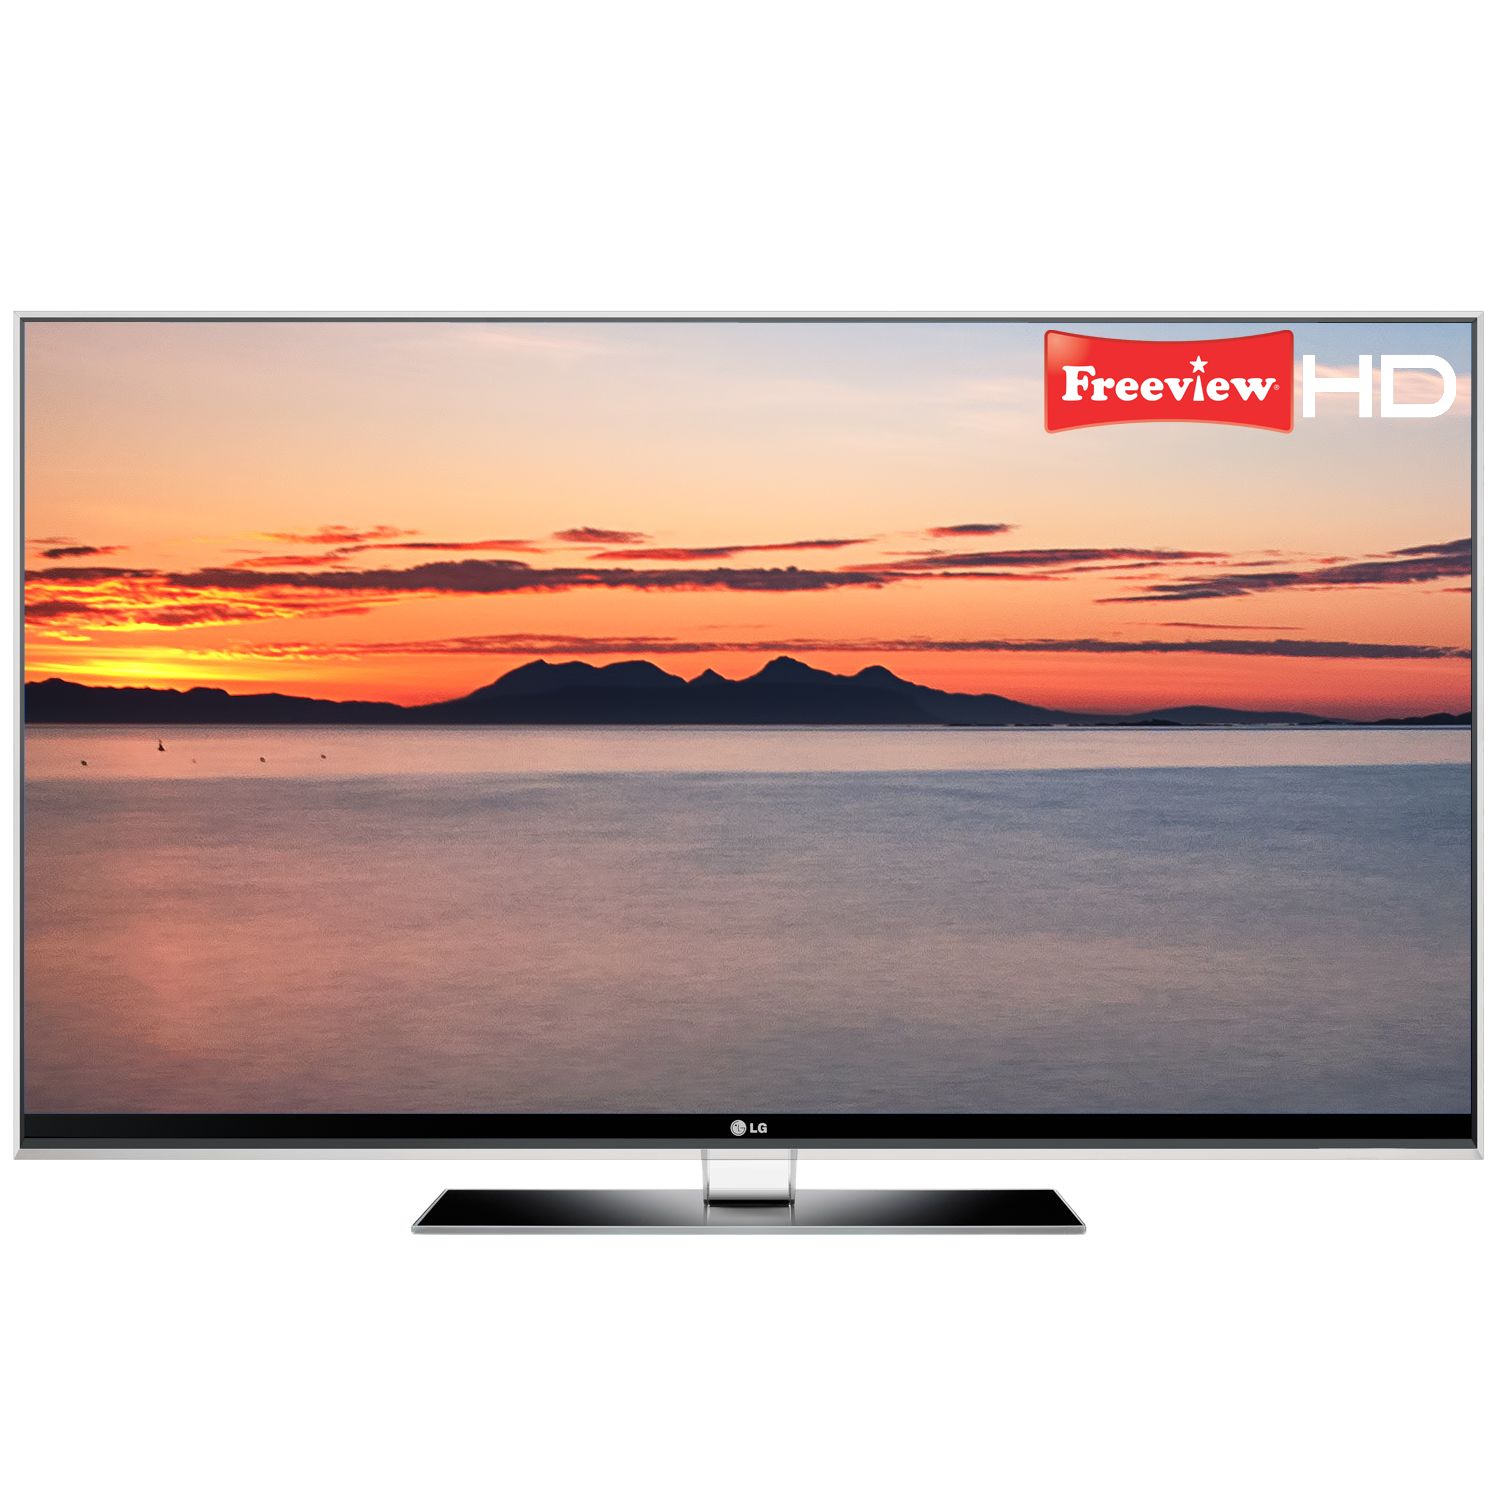 LG 55LX9900 LED HD 1080p 3D Digital Television, 55 Inch with Built-in Freeview HD at John Lewis